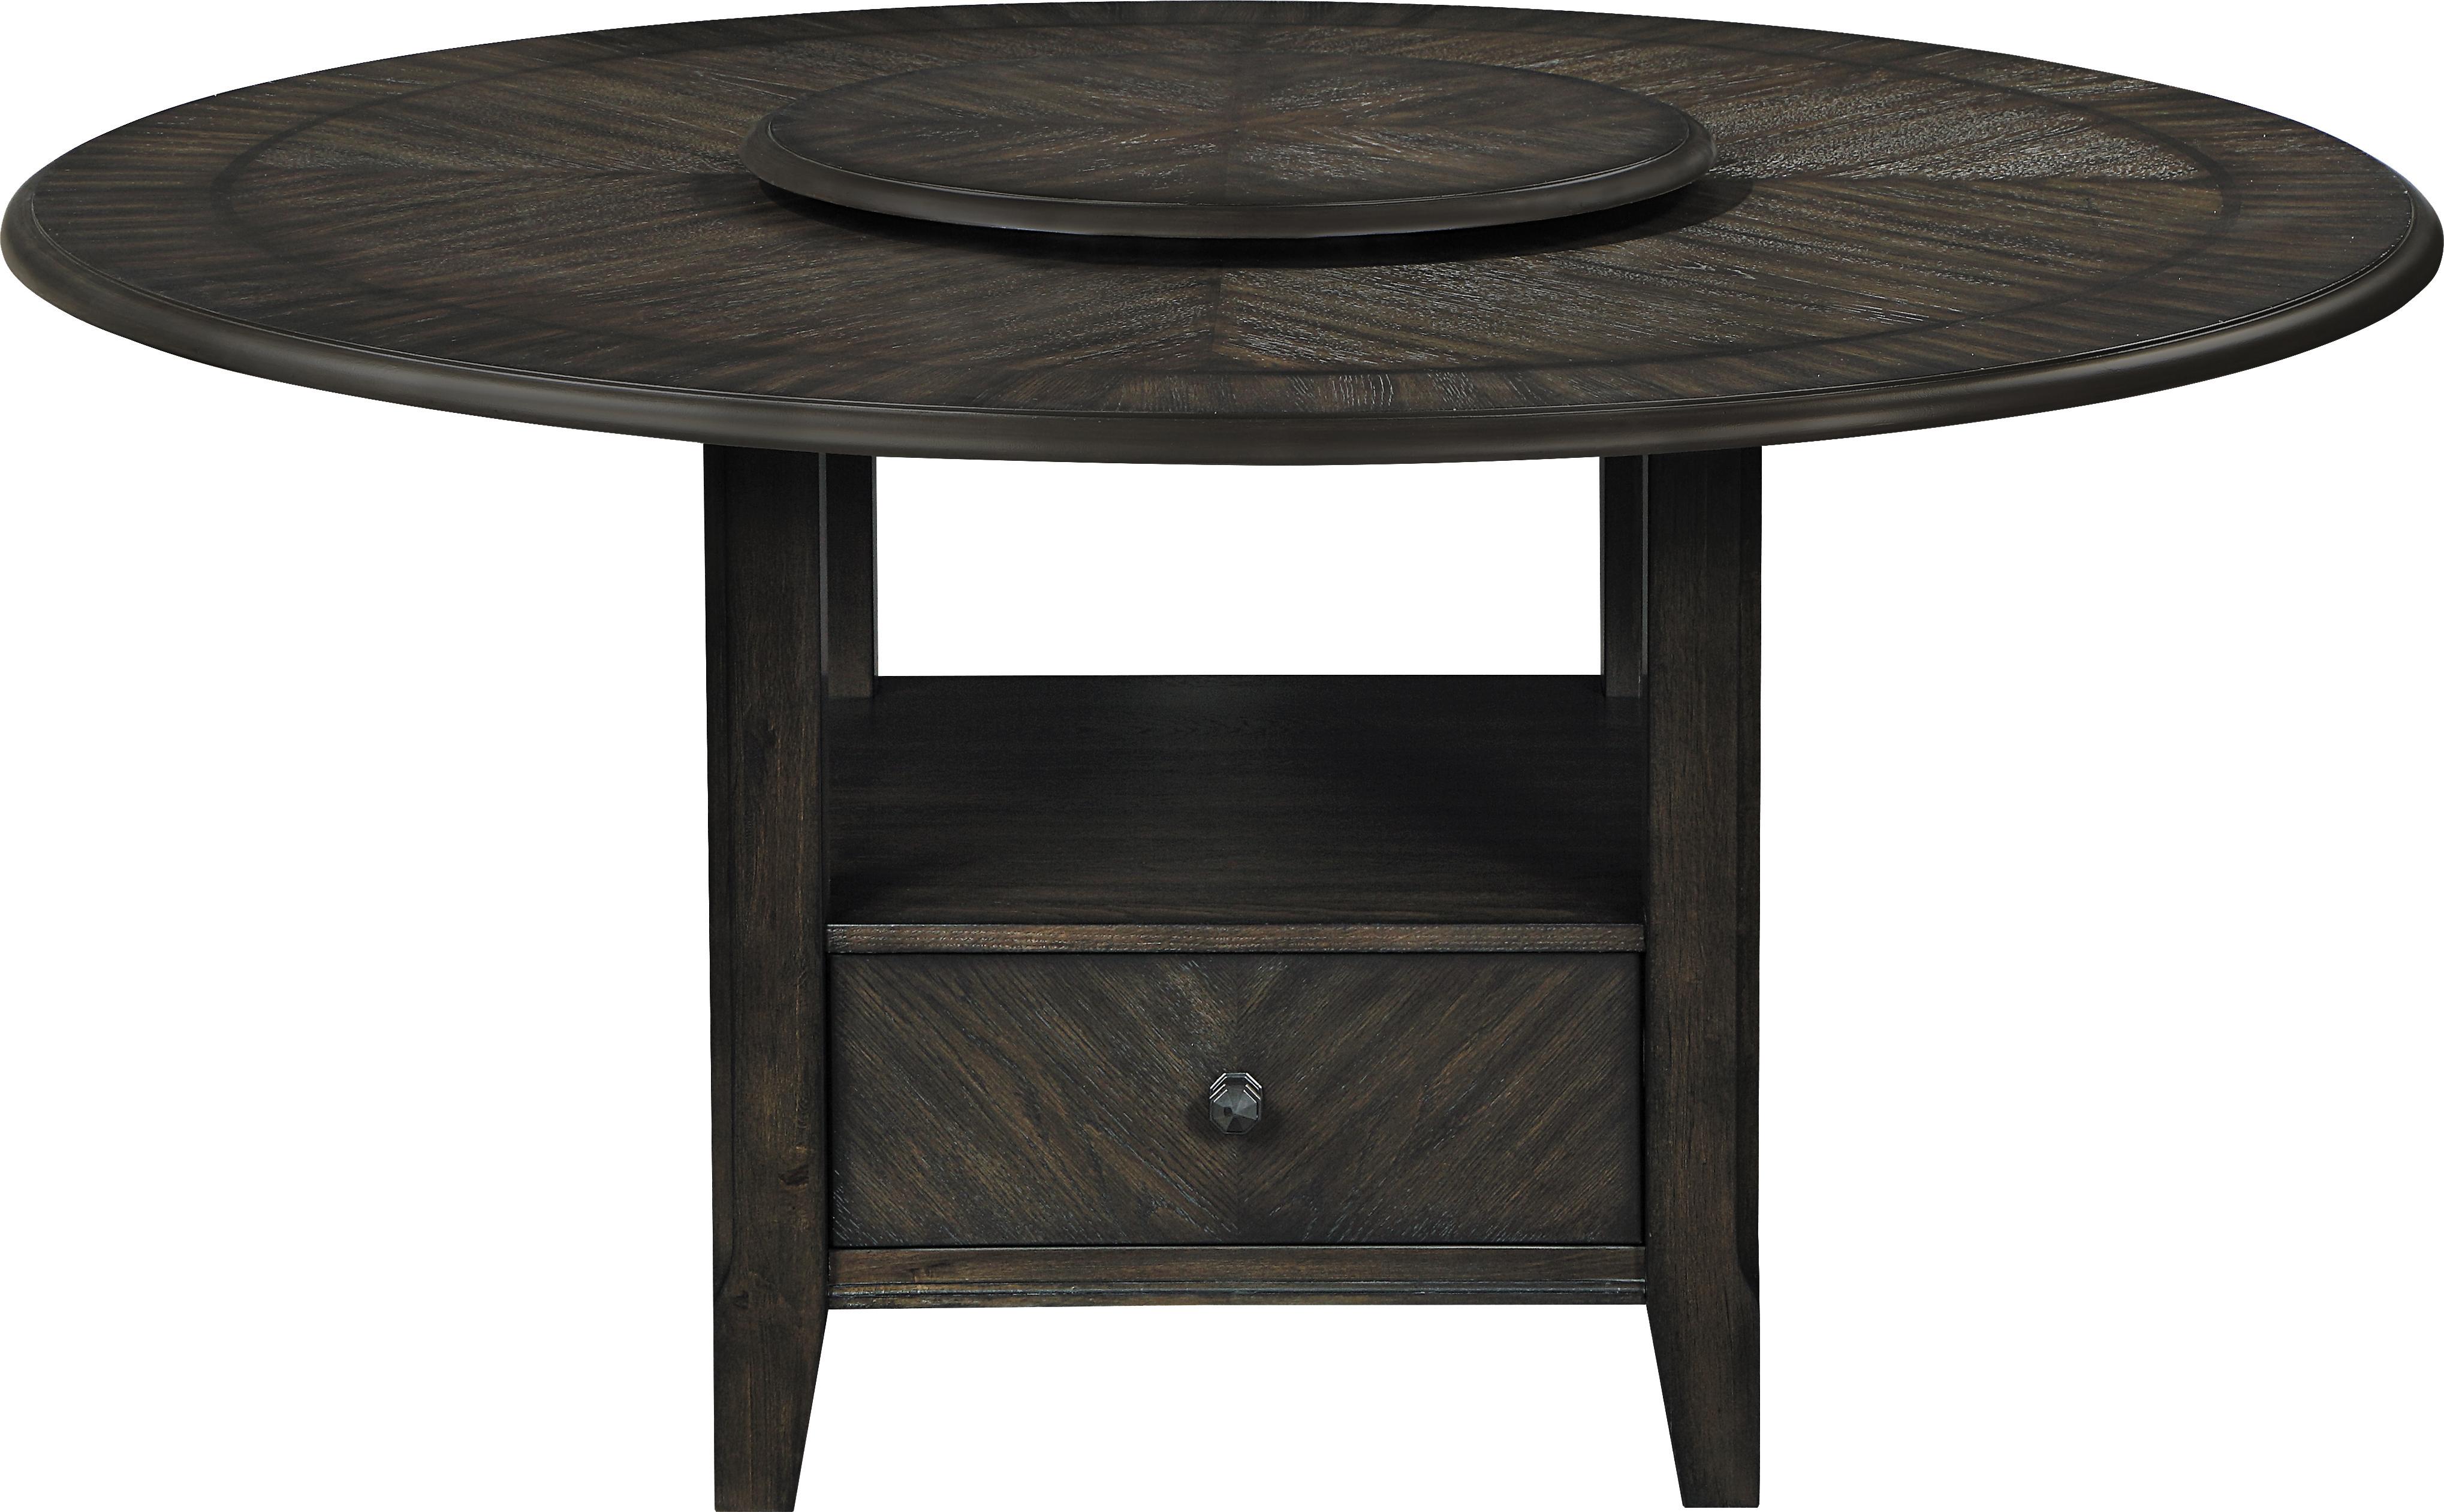 Transitional Dining Table 115101 Twyla 115101 in Cocoa 